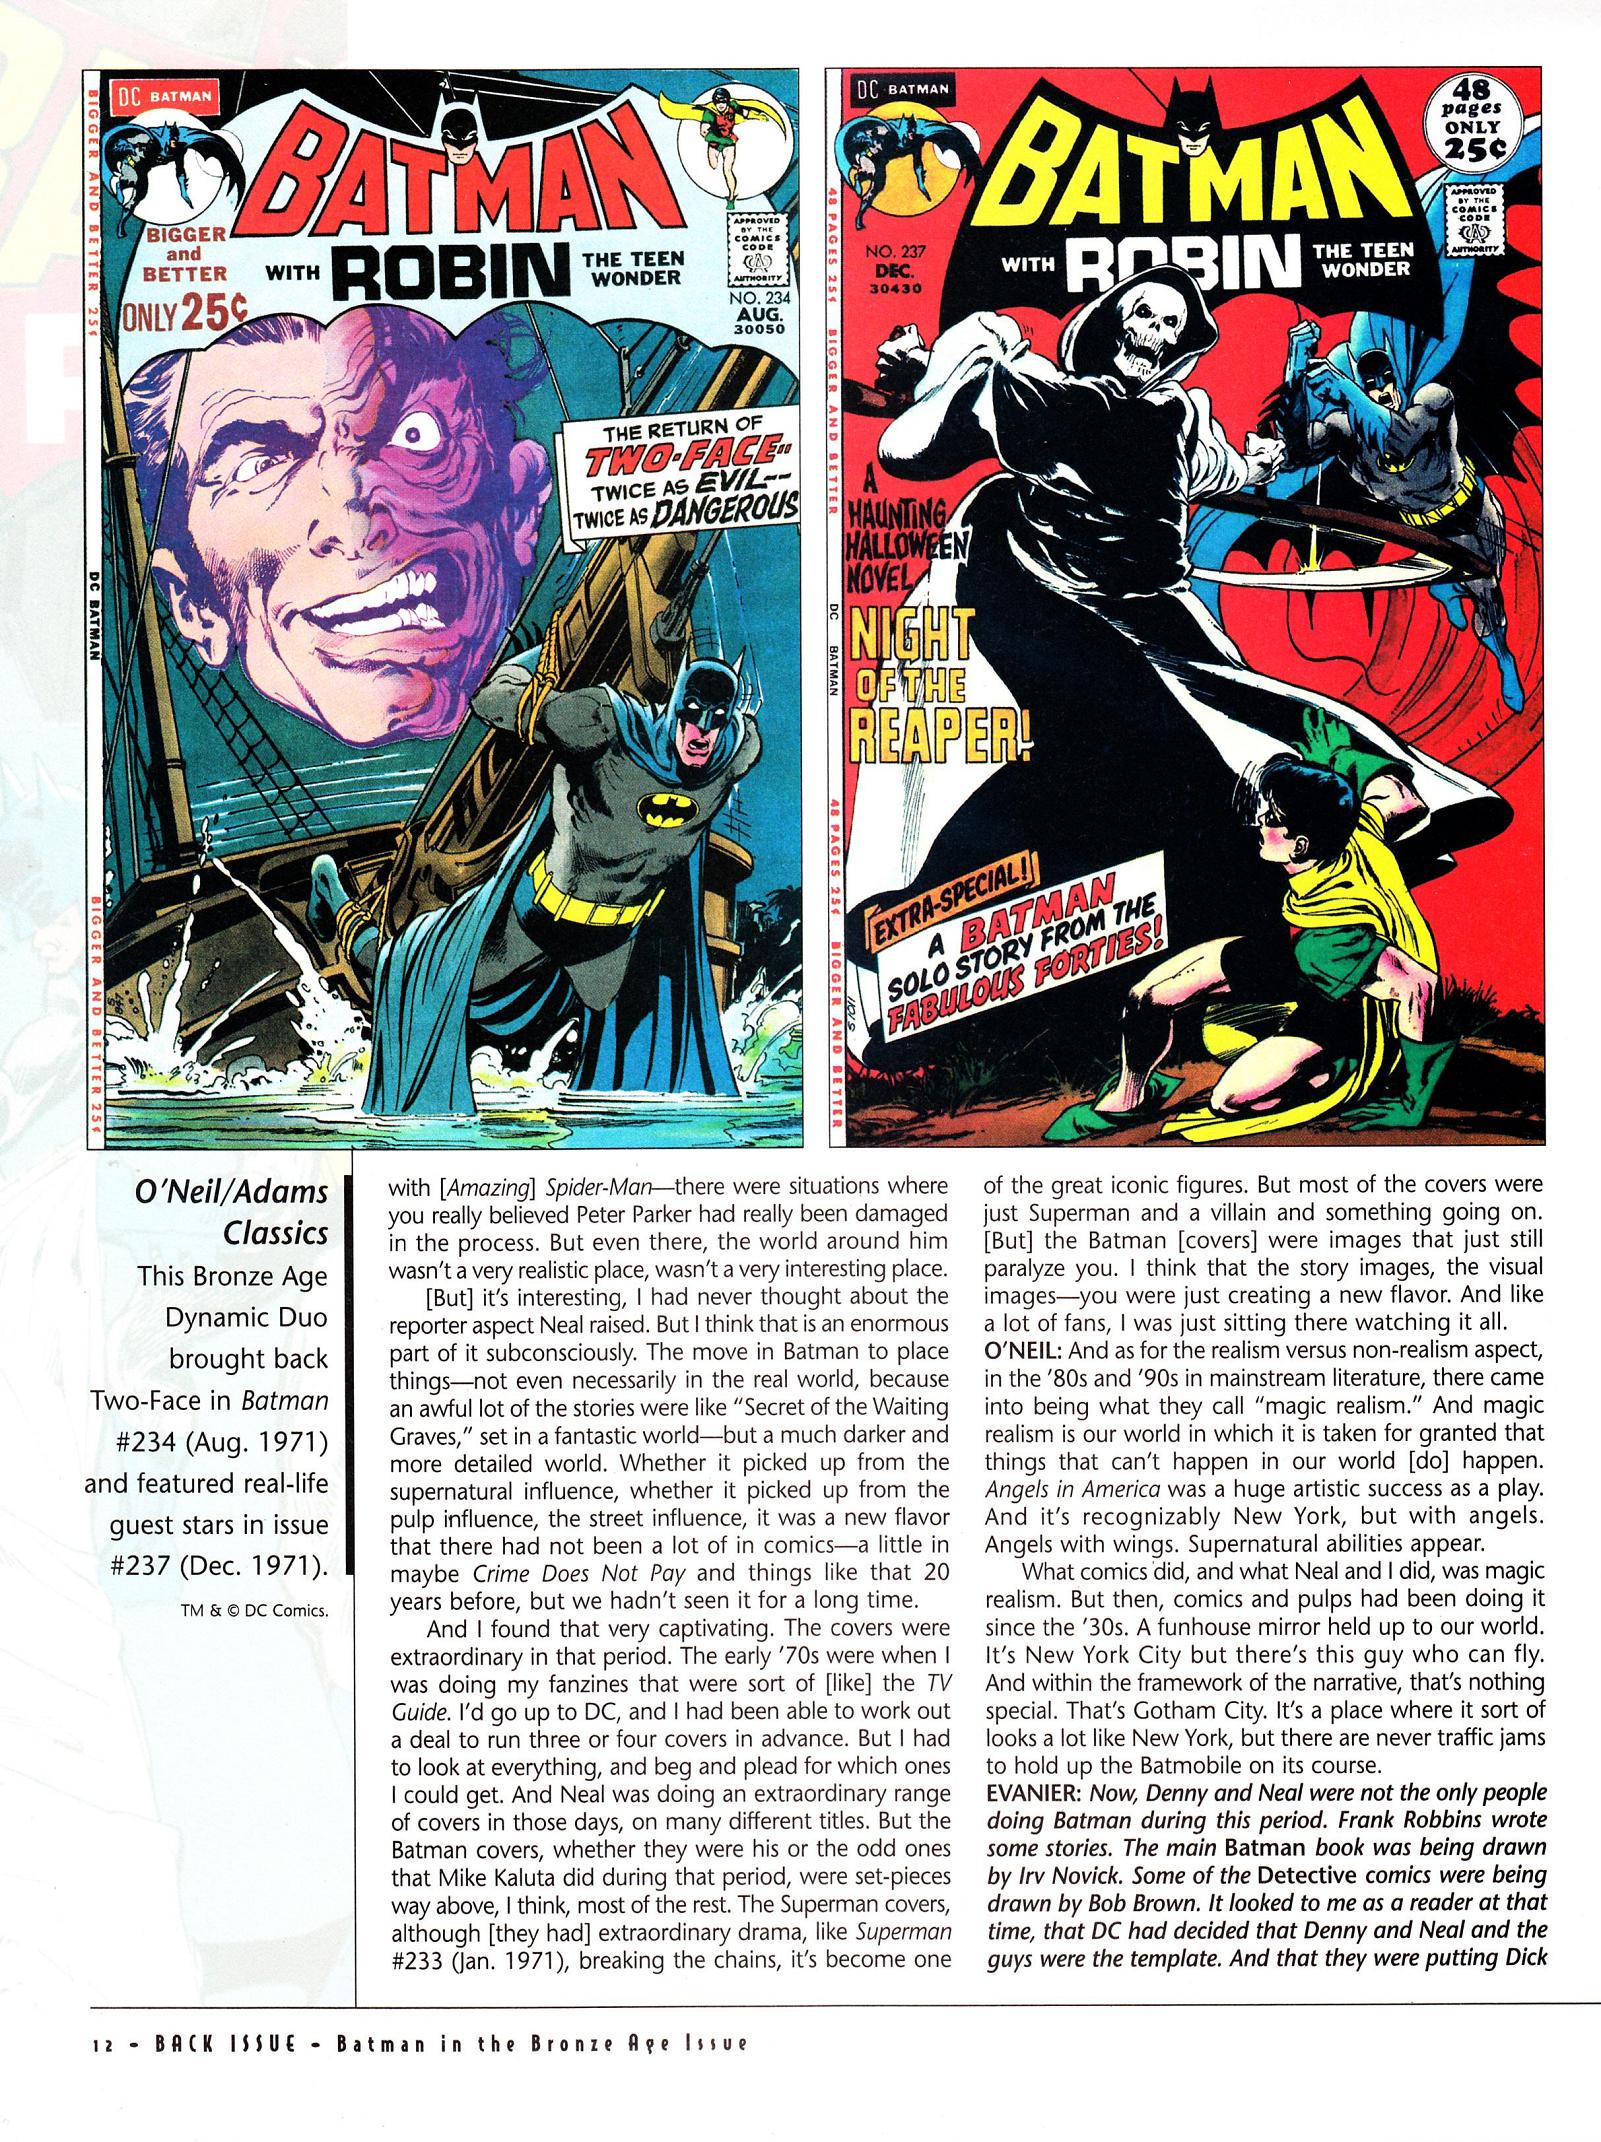 Read online Back Issue comic -  Issue #50 - 14